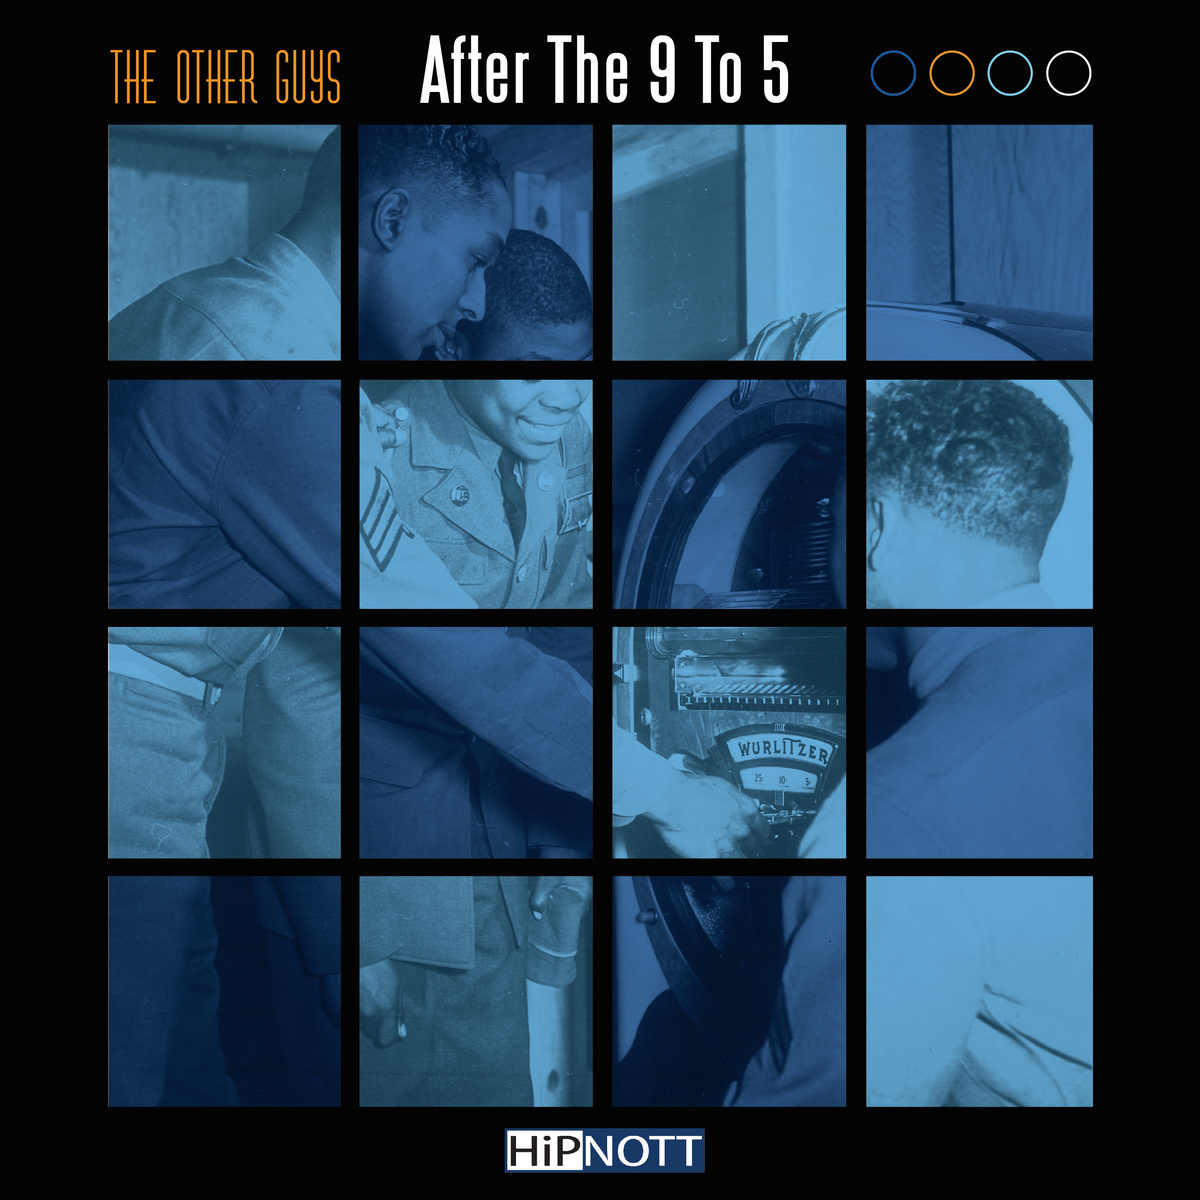 The Other Guys - "After The 9 to 5" (Release)